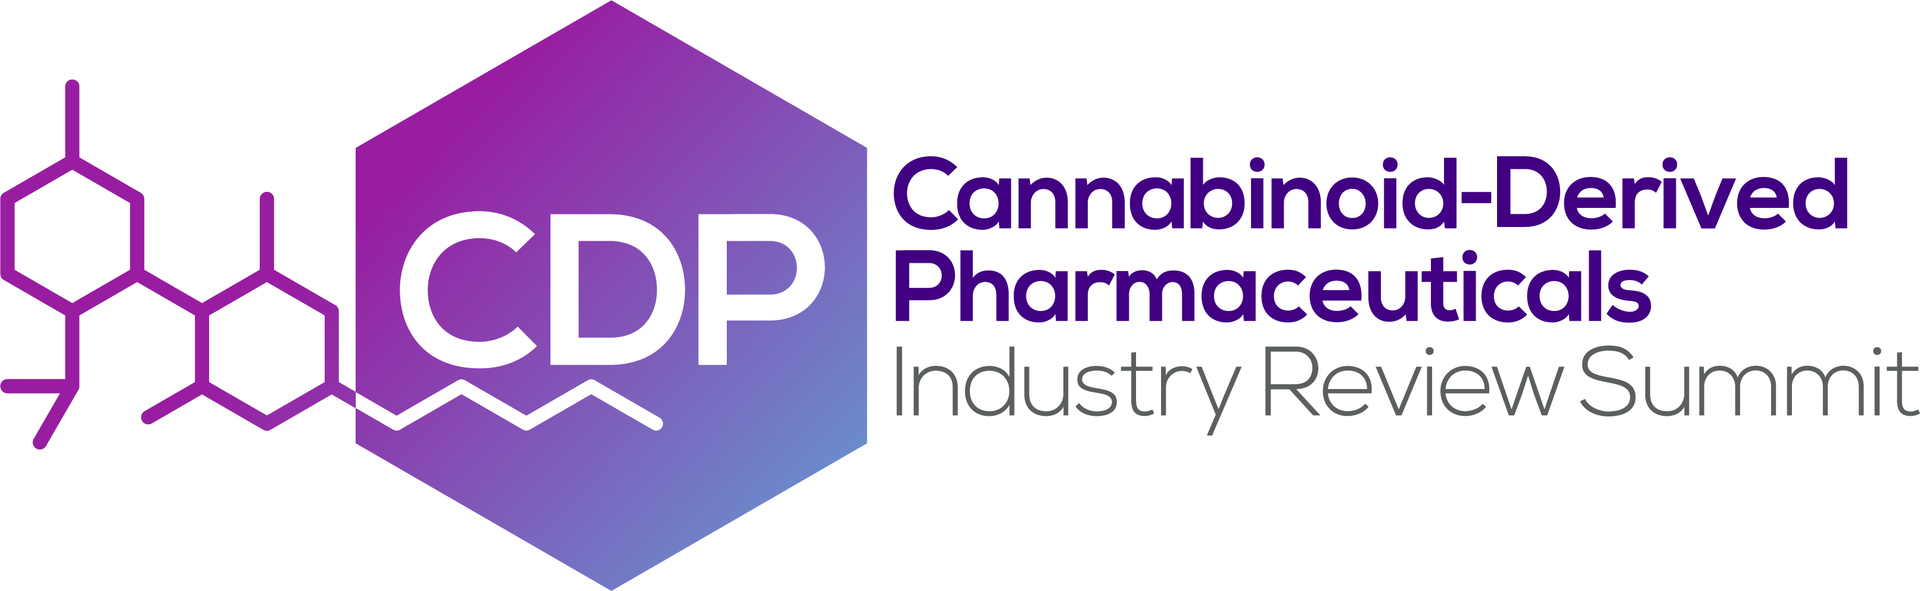 Cannabinoid Derived Pharmaceuticals Industry Review Summit